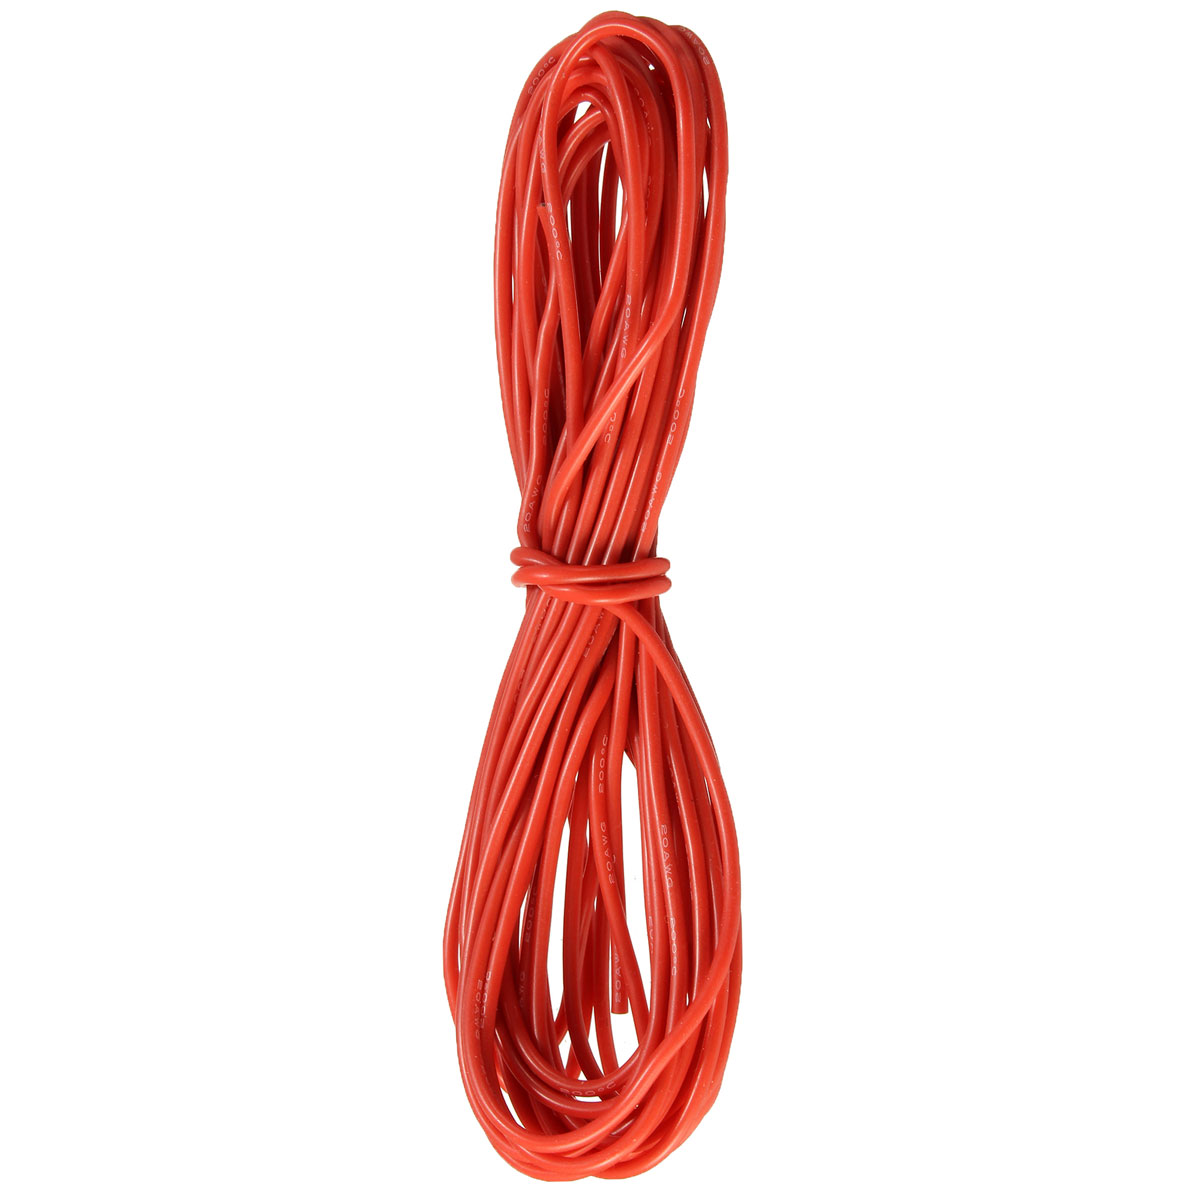 DANIU-10-Meter-Red-Silicone-Wire-Cable-10121416182022AWG-Flexible-Cable-1170297-5